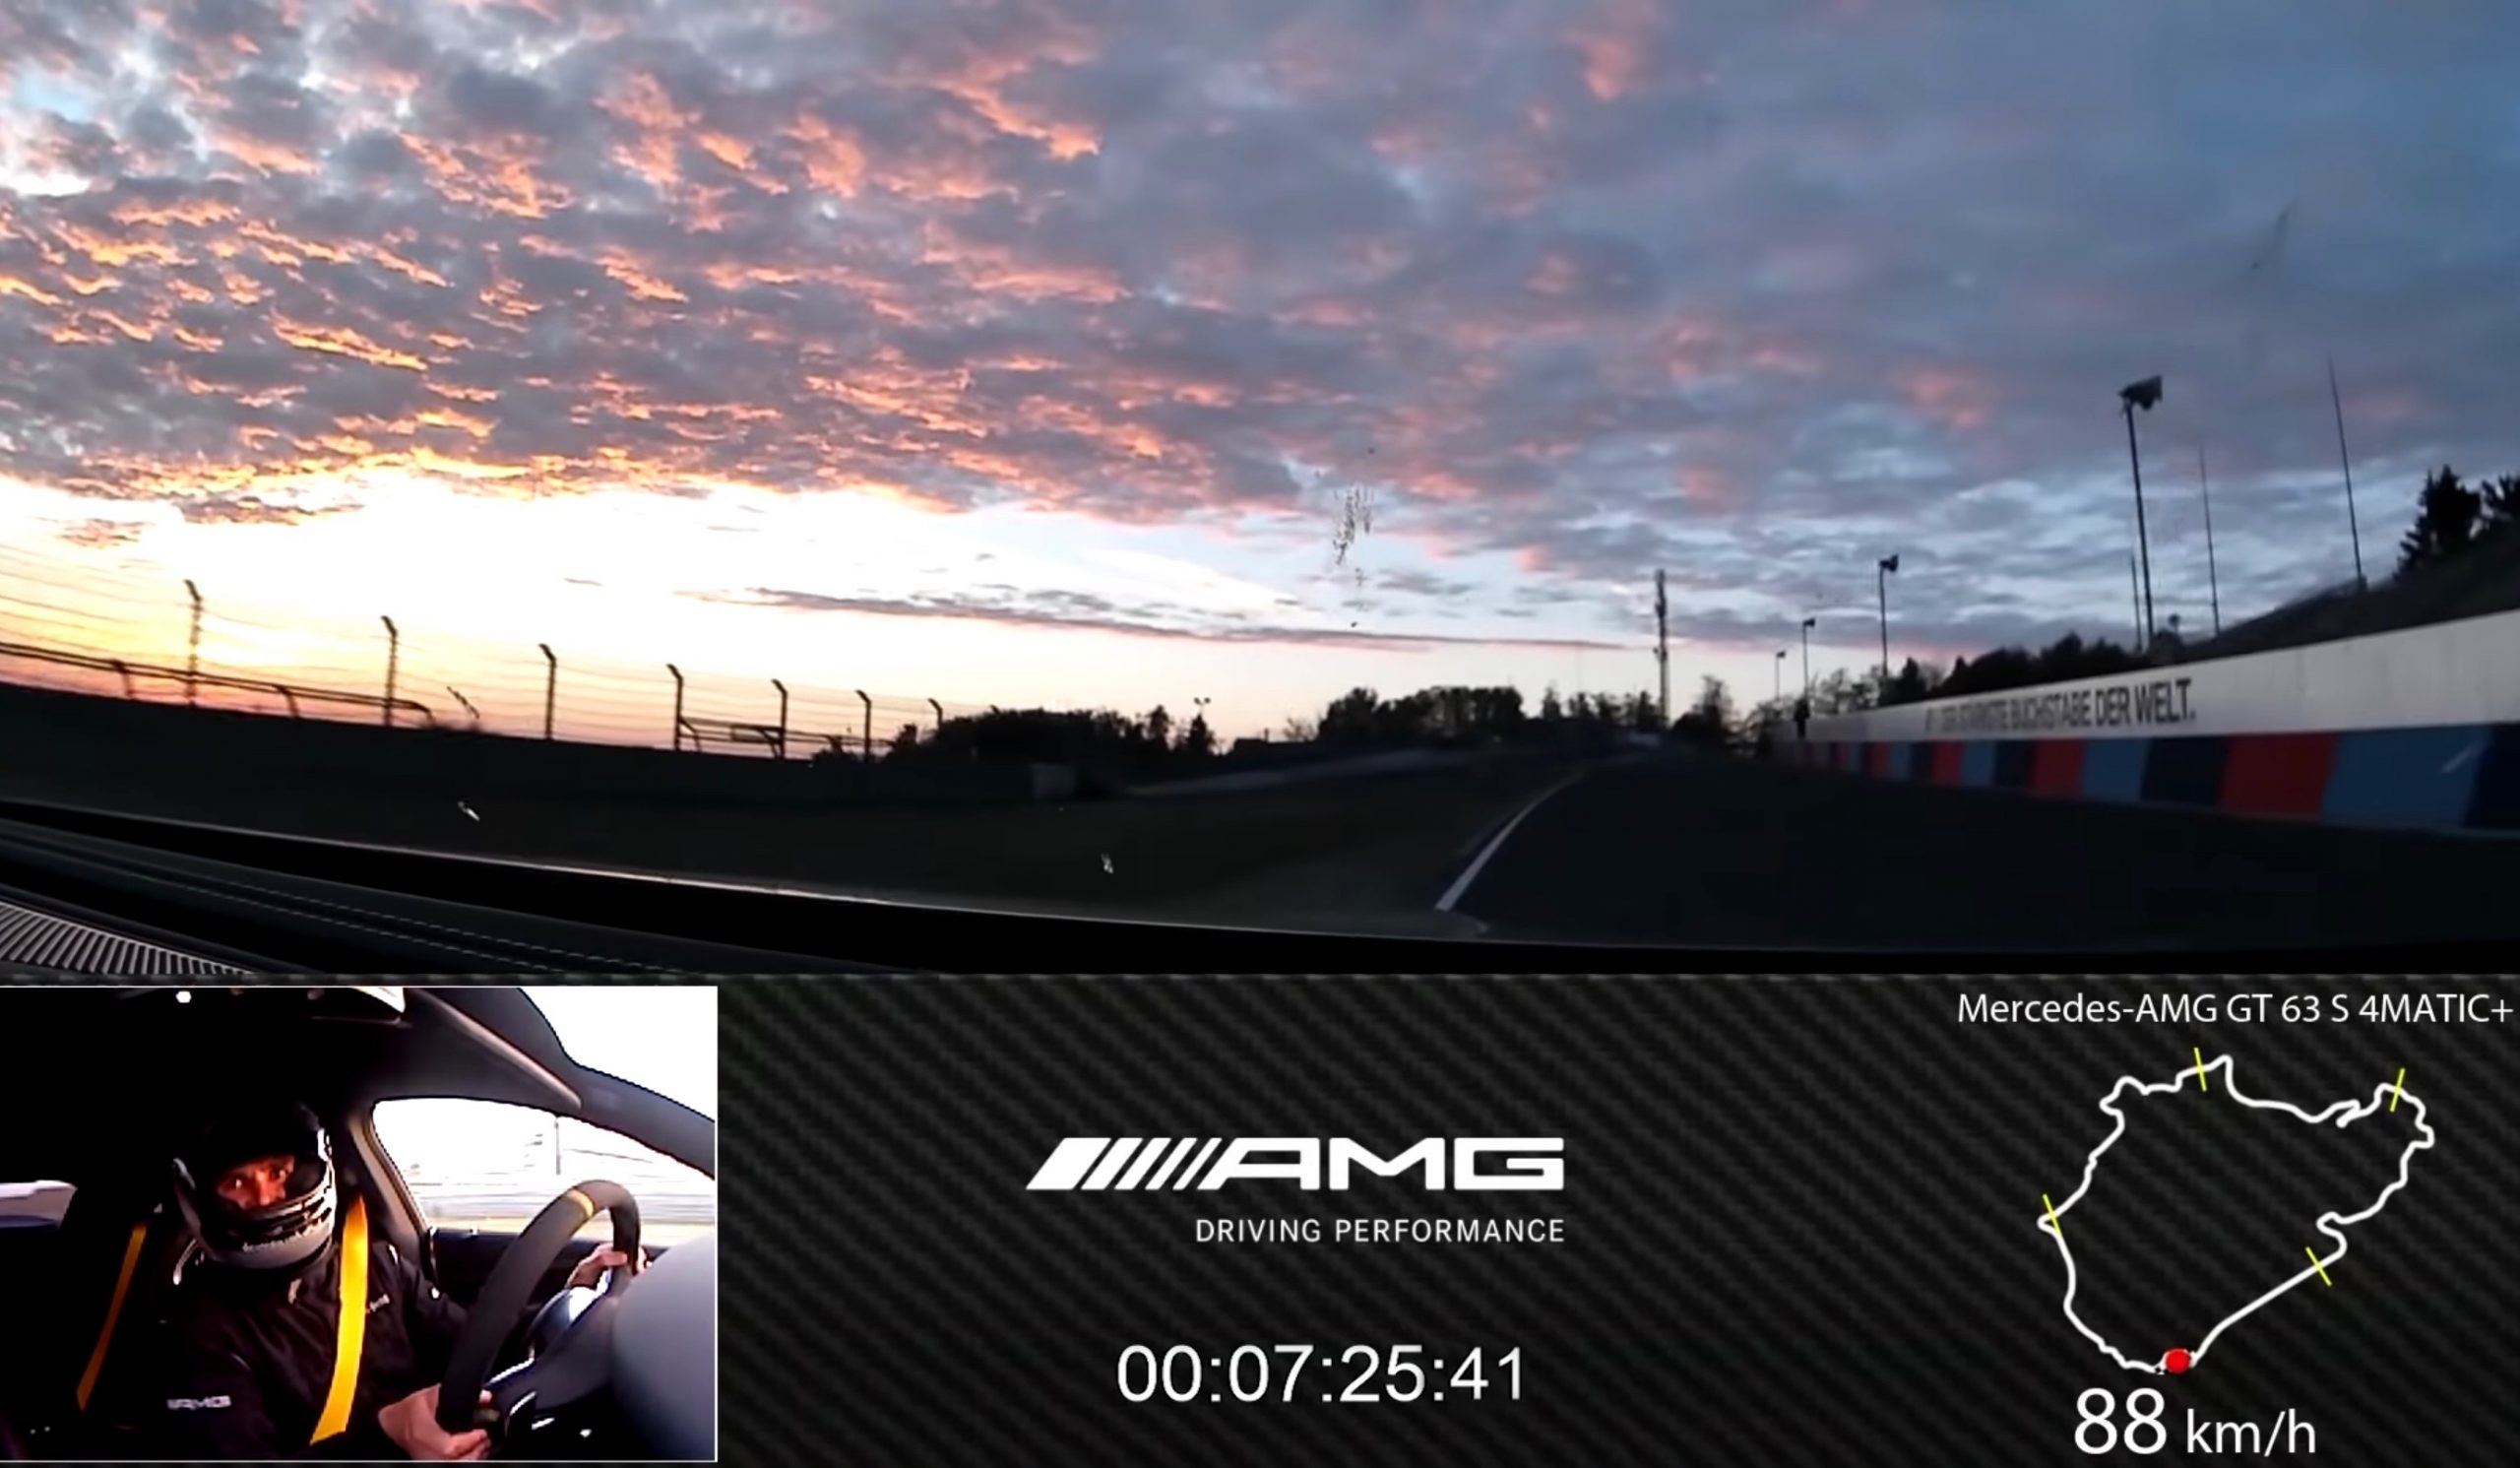 Mercedes-AMG GT 63 S claims Nurburgring lap record (video)